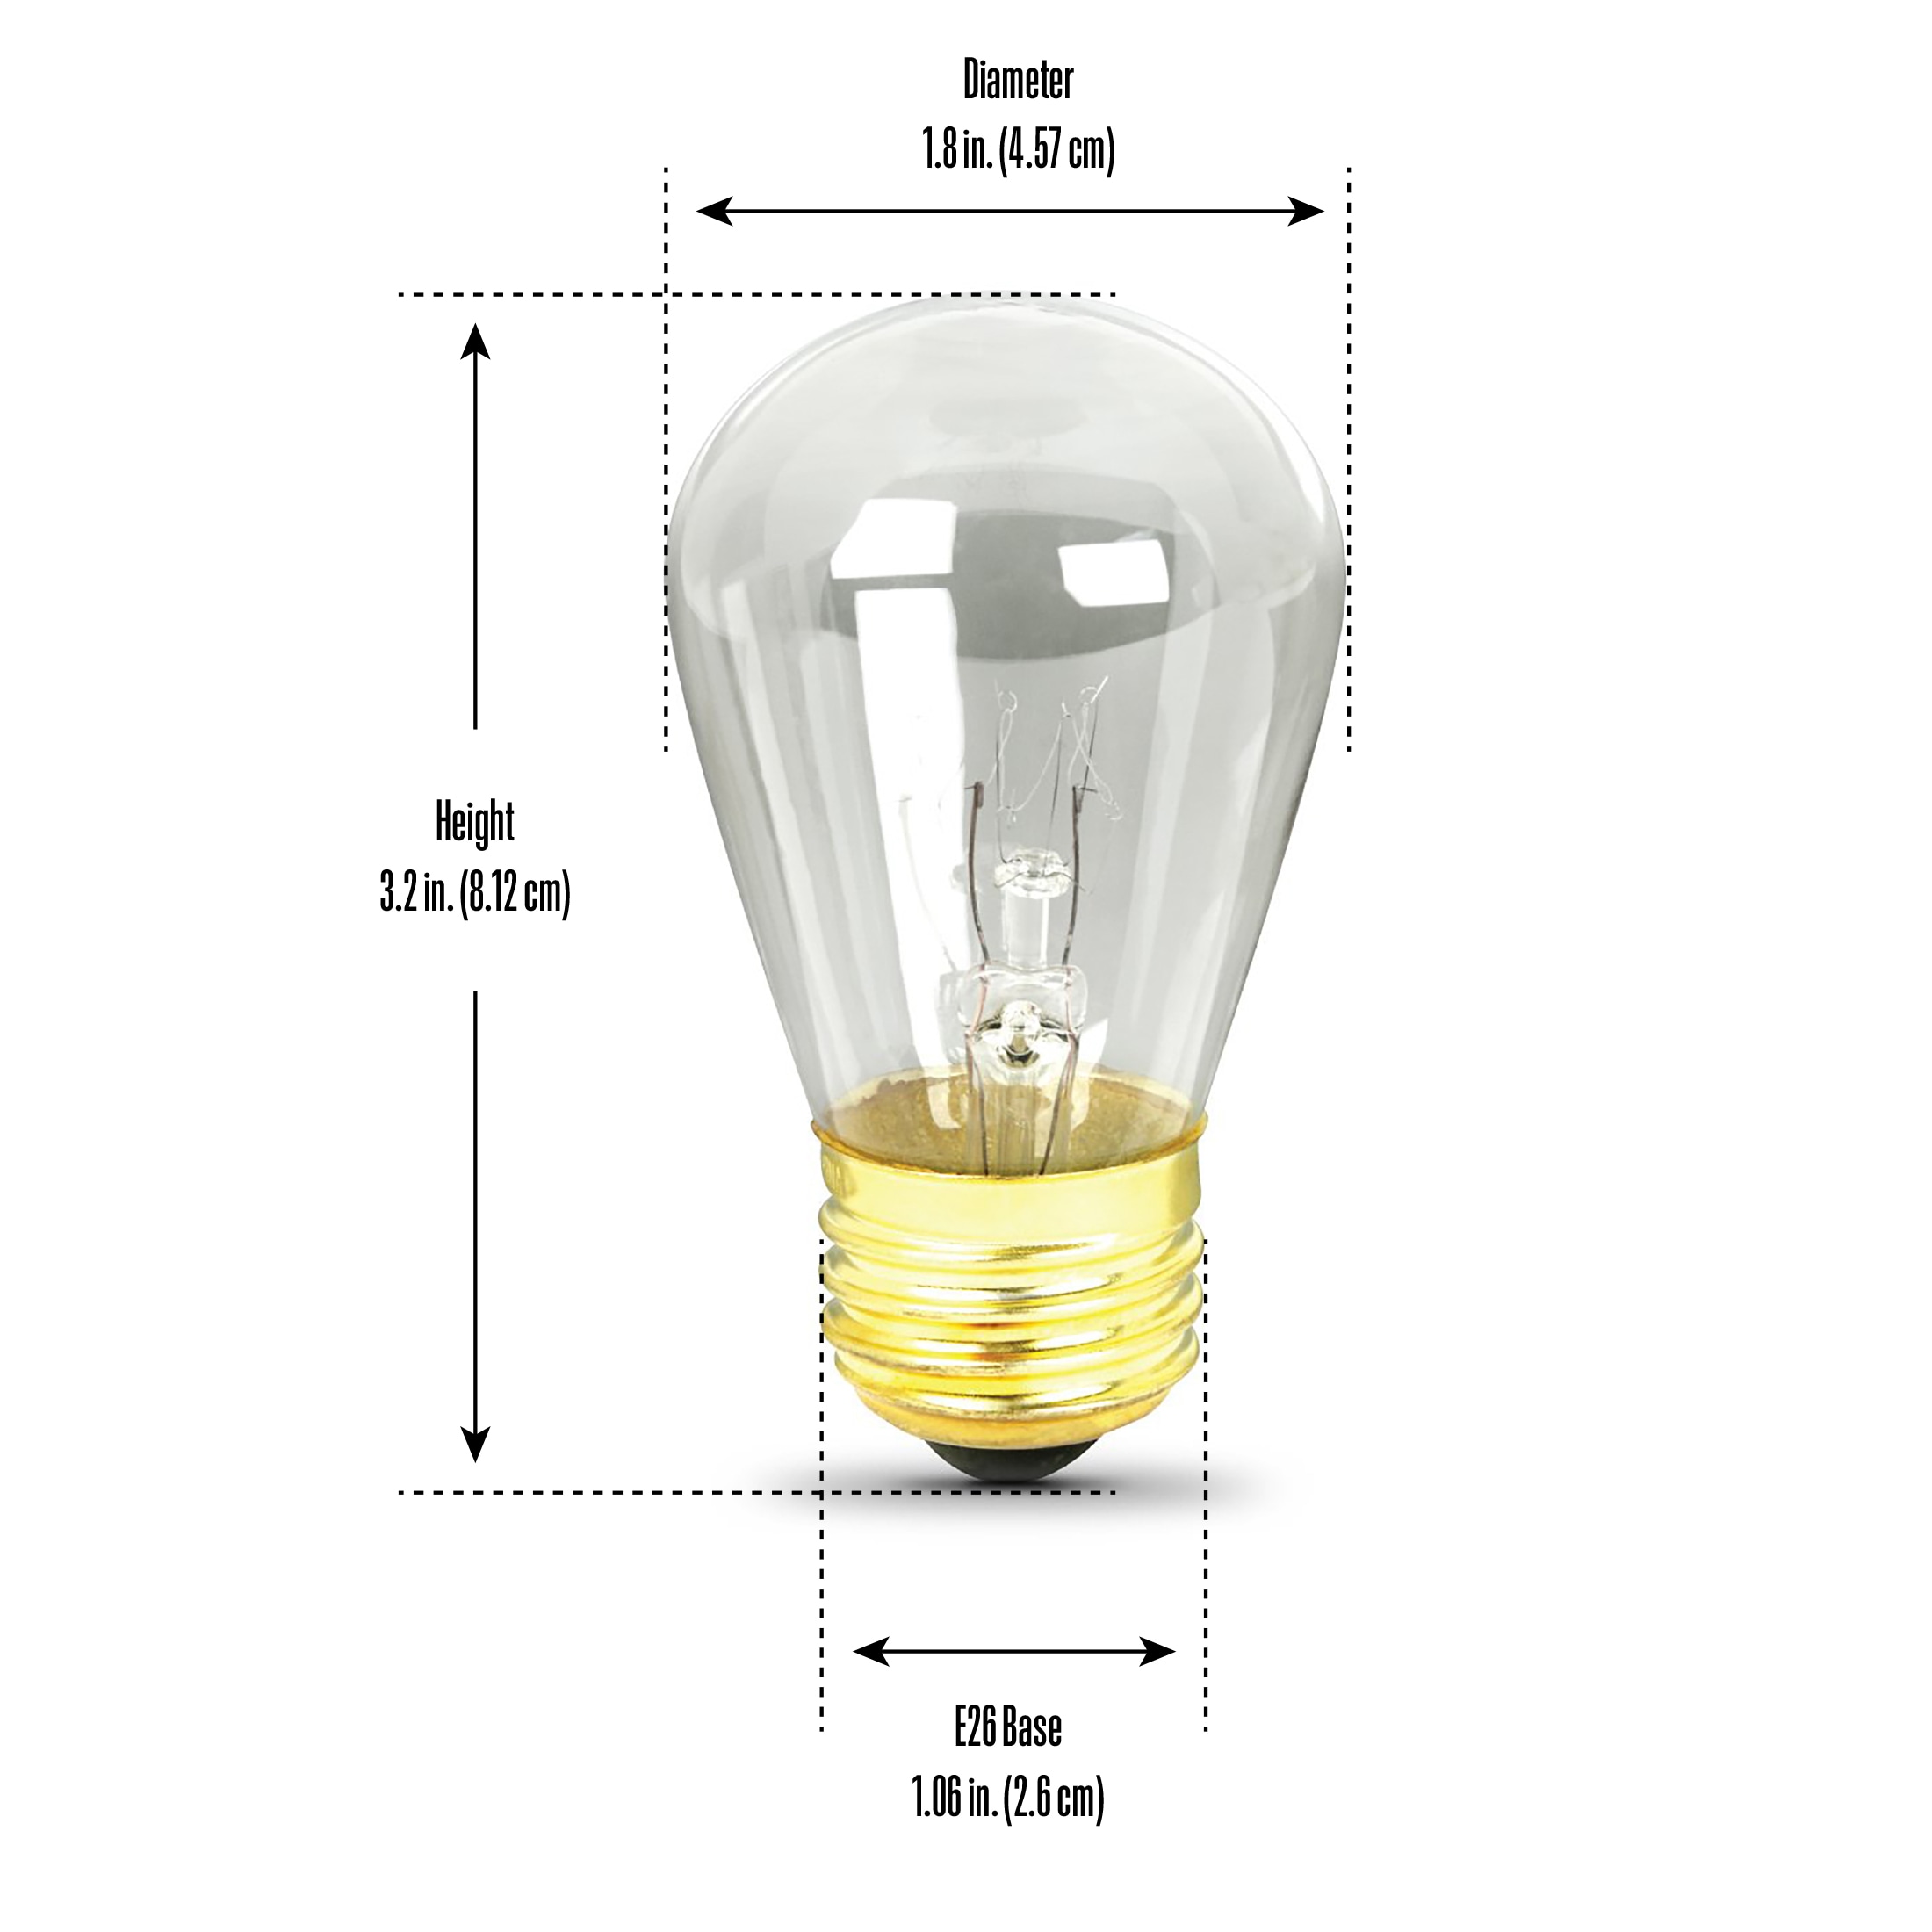 appliances - Can I use a regular E26 LED bulb as a replacement for a  refrigerator light bulb? - Home Improvement Stack Exchange